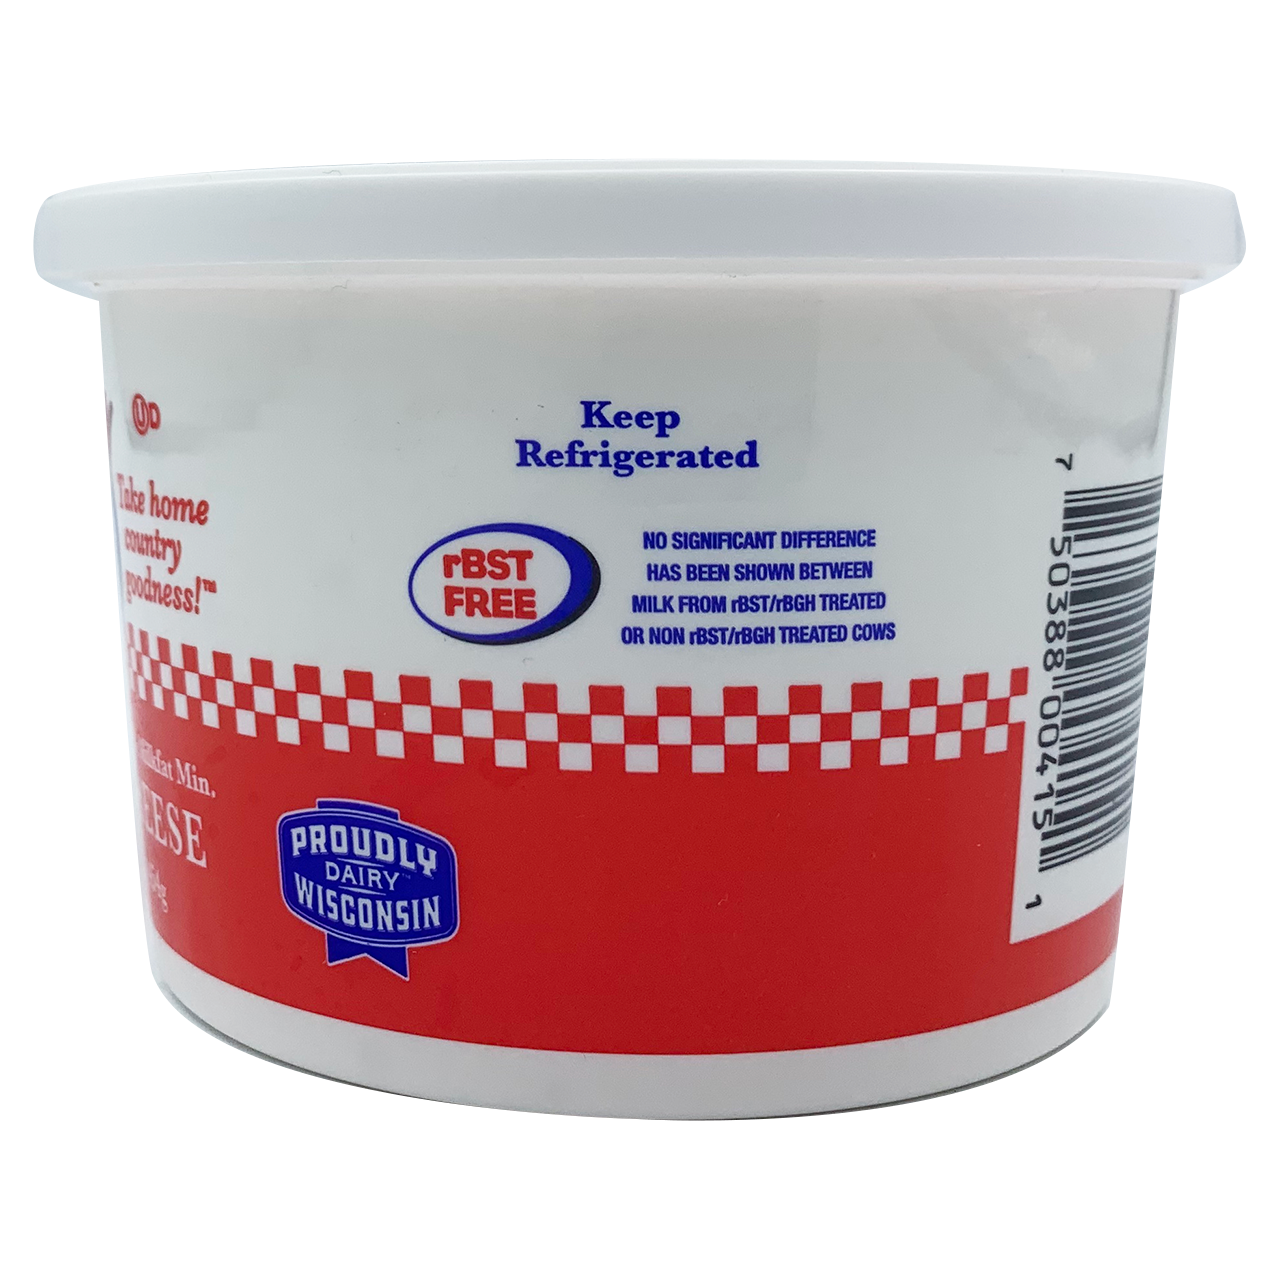 Dry Curd Cottage Cheese from Westby Cooperative Creamery - Ltd Stock